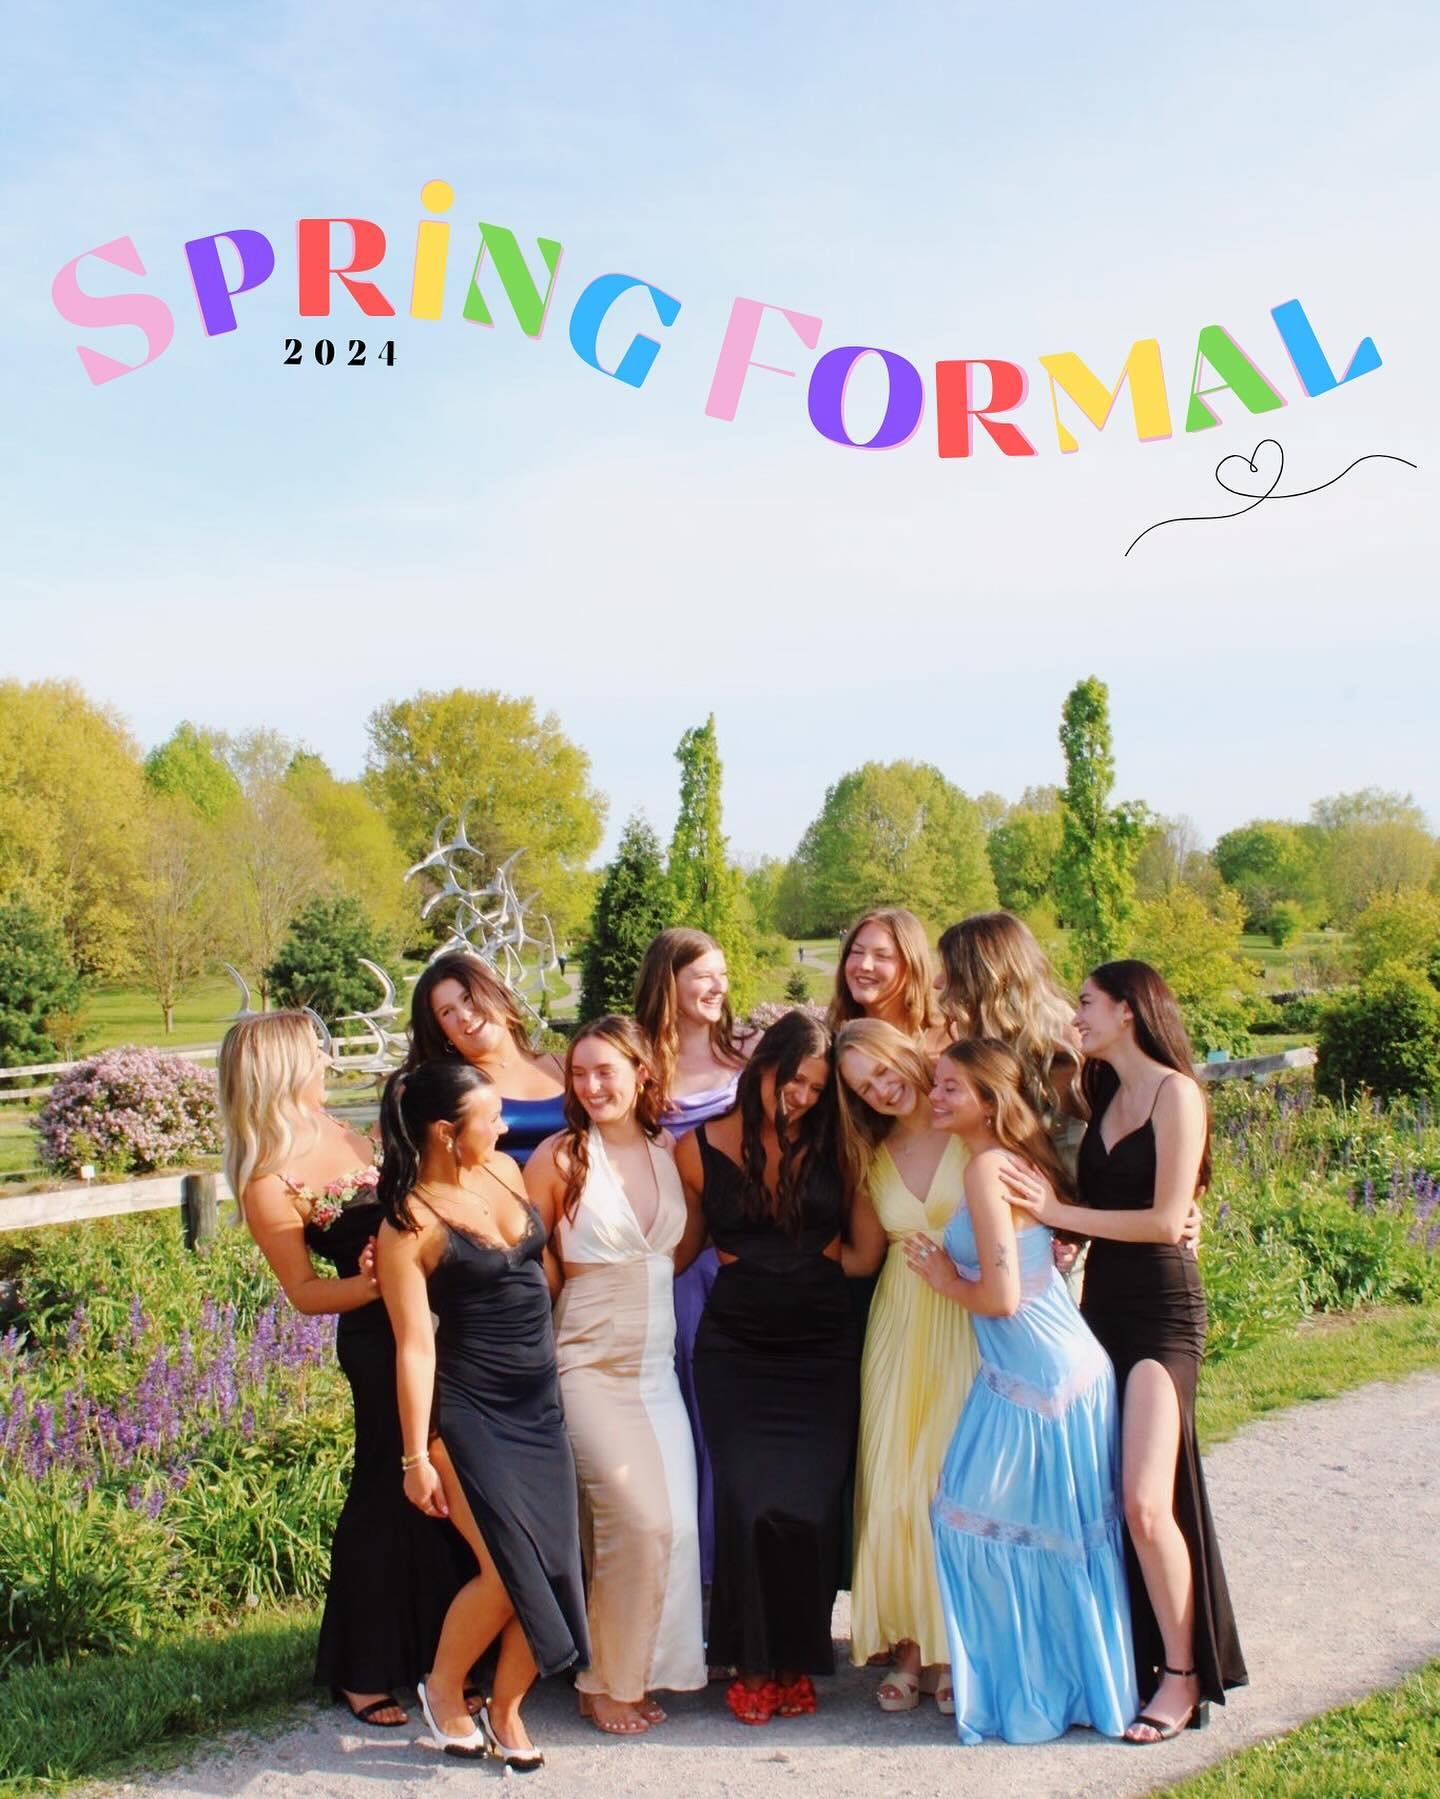 Spring Formal 💗💐🌼

Our sisters had an amazing evening at our Spring 2024 Formal last night &lt;3 A huge thank you to @elsey.riney for planning such an amazing event! What a great way to end the school year 💗